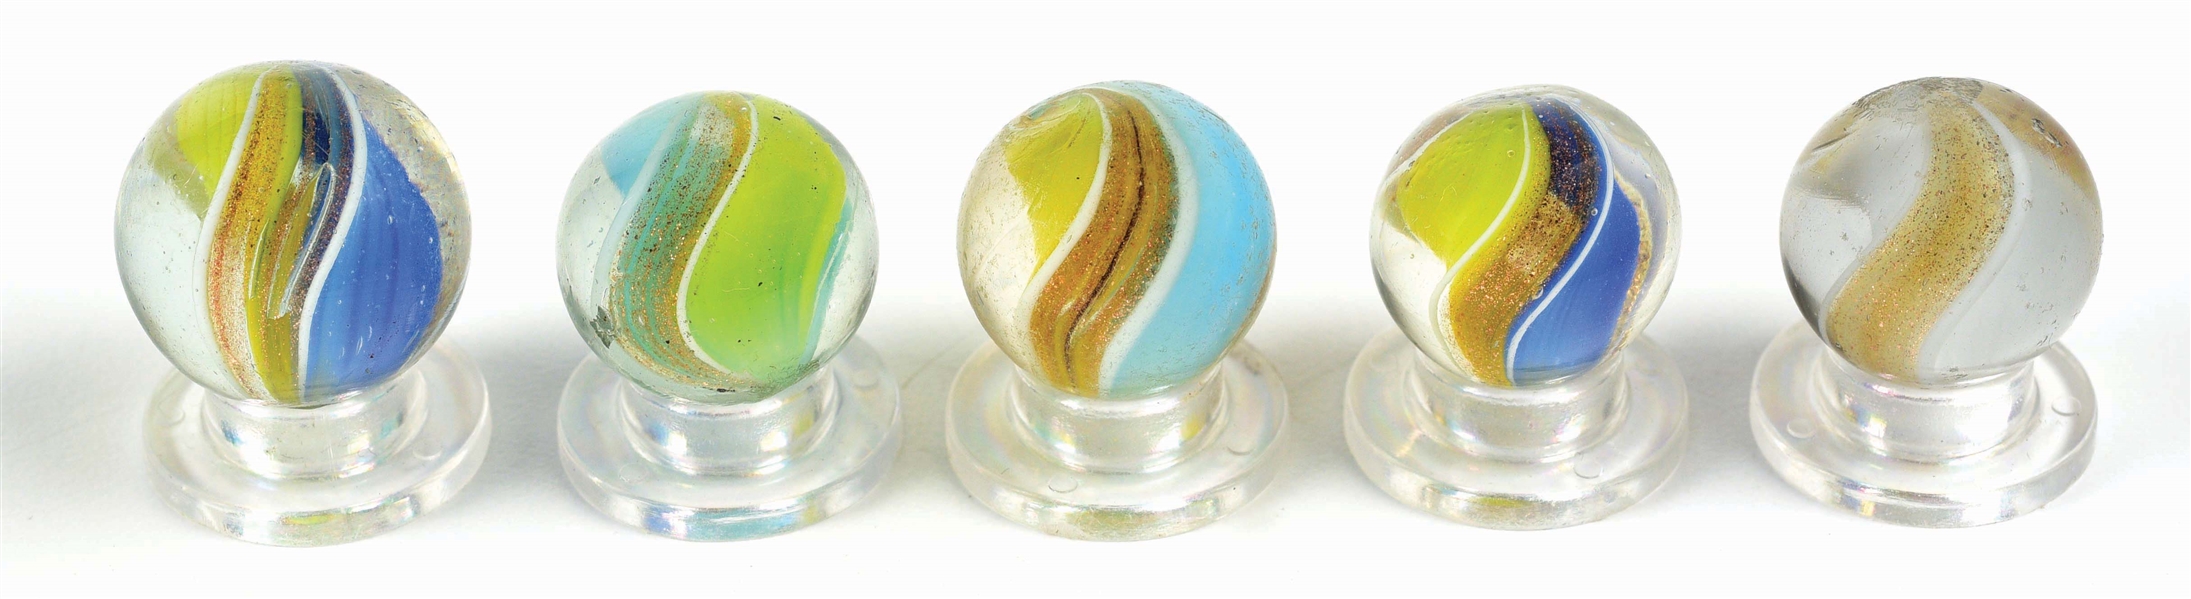 LOT OF 5: RIBBON LUTZ MARBLES.